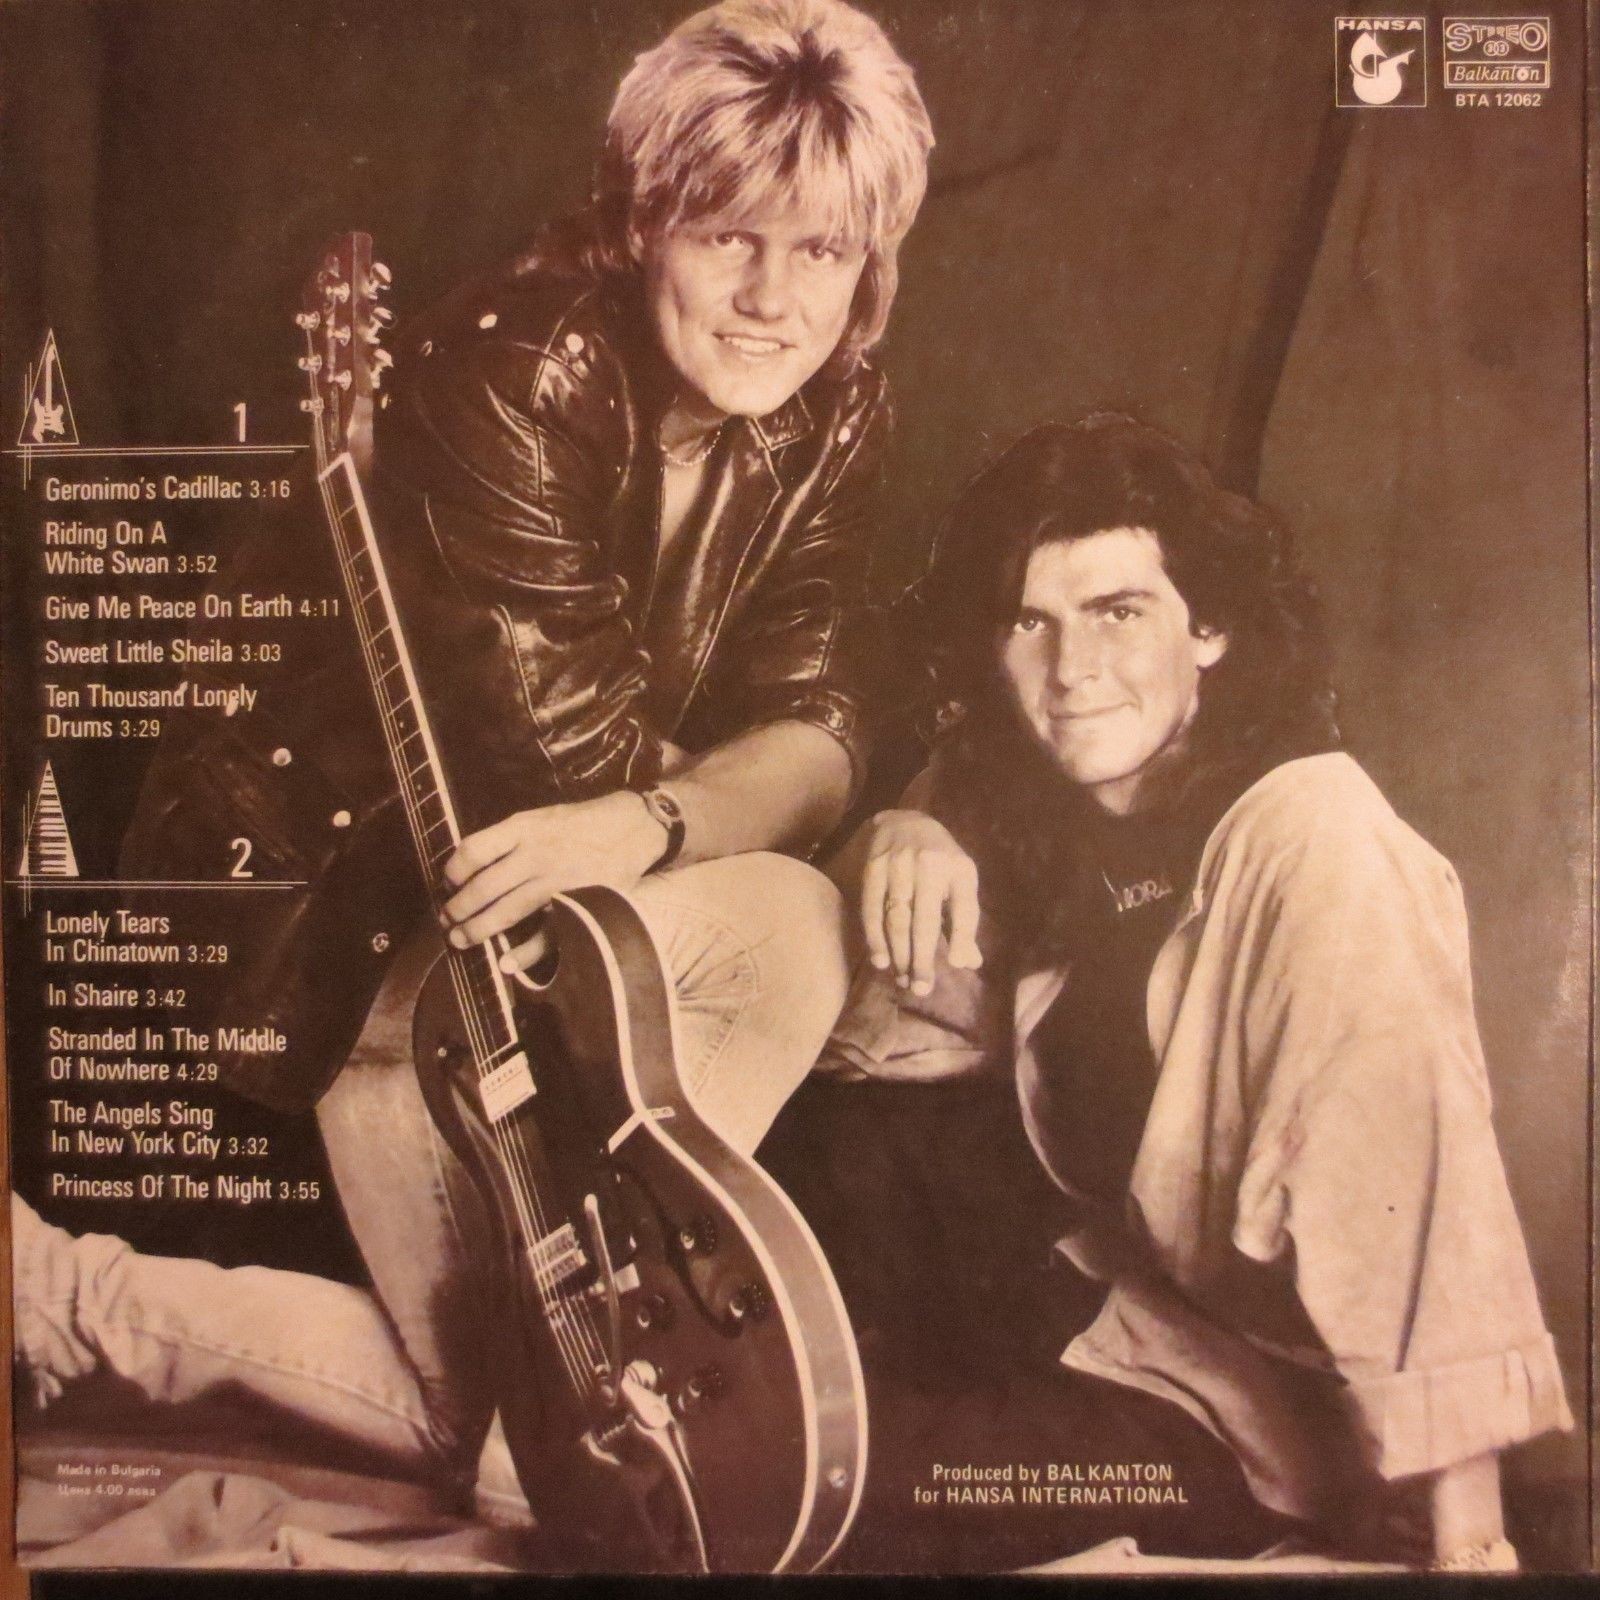 Modern Talking. «In The Middle Of Nowhere» (The 4-th Album)